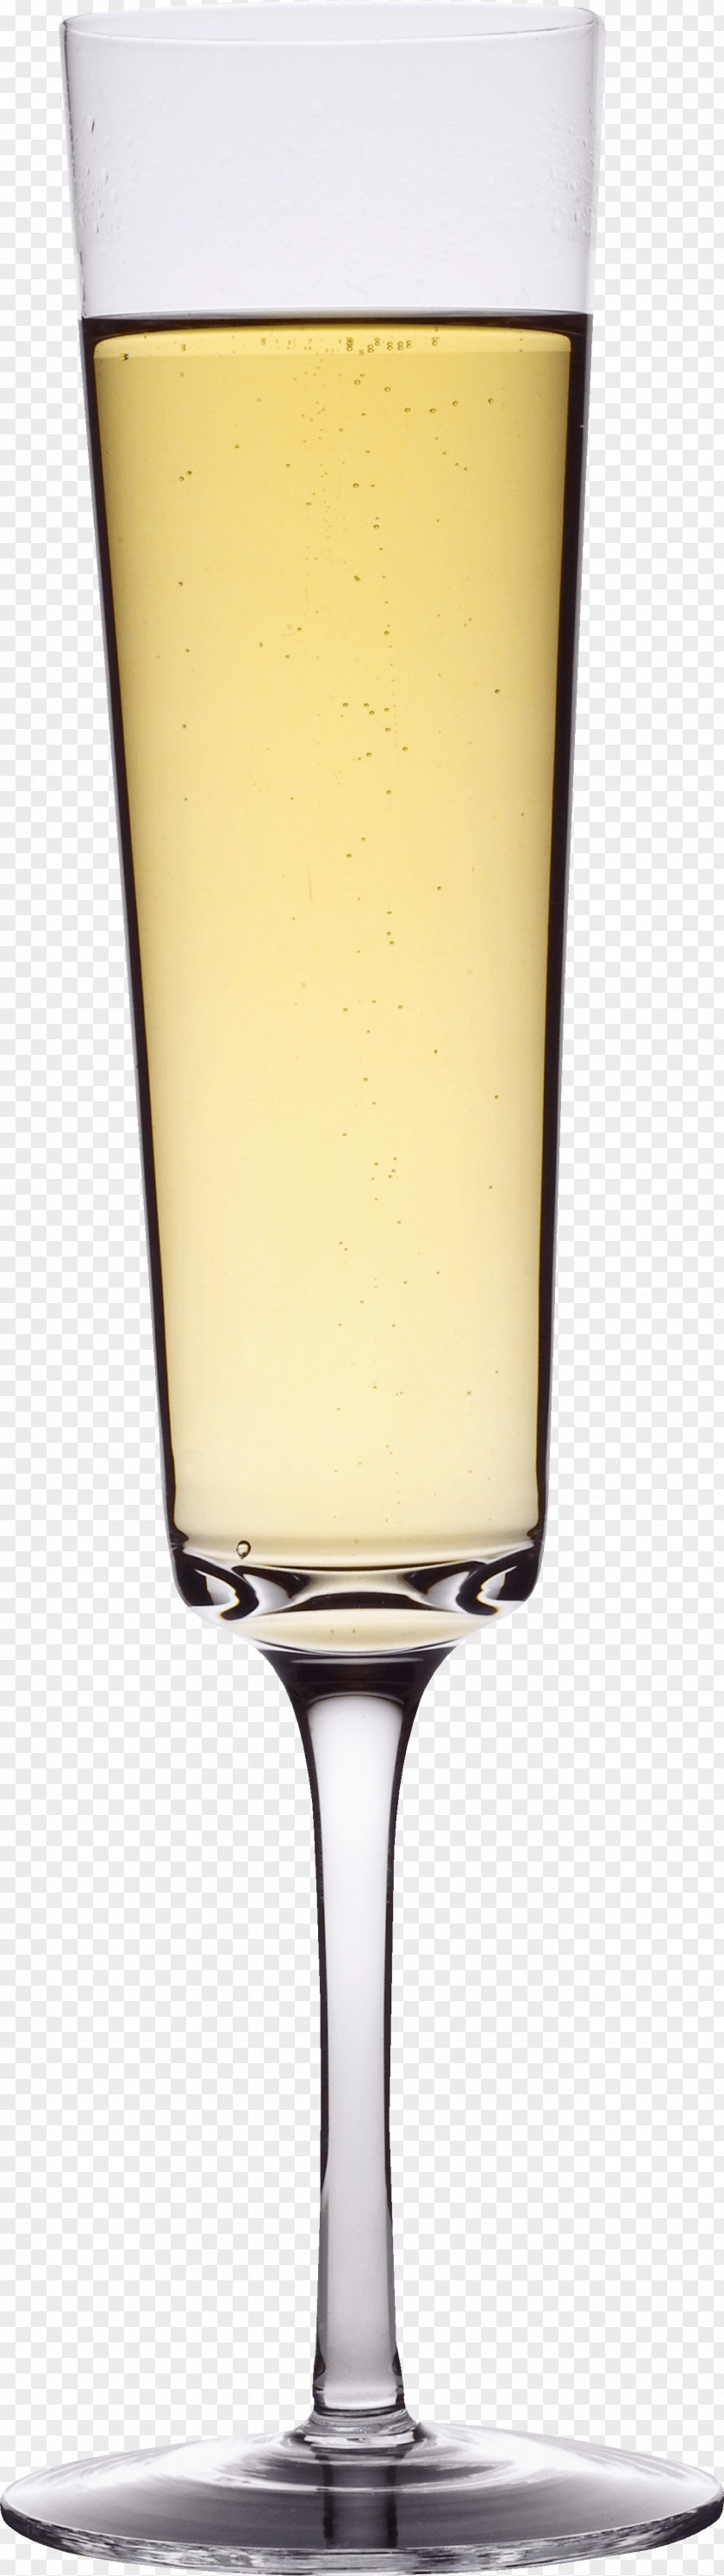 Glass Image Champagne Cocktail Wine PNG